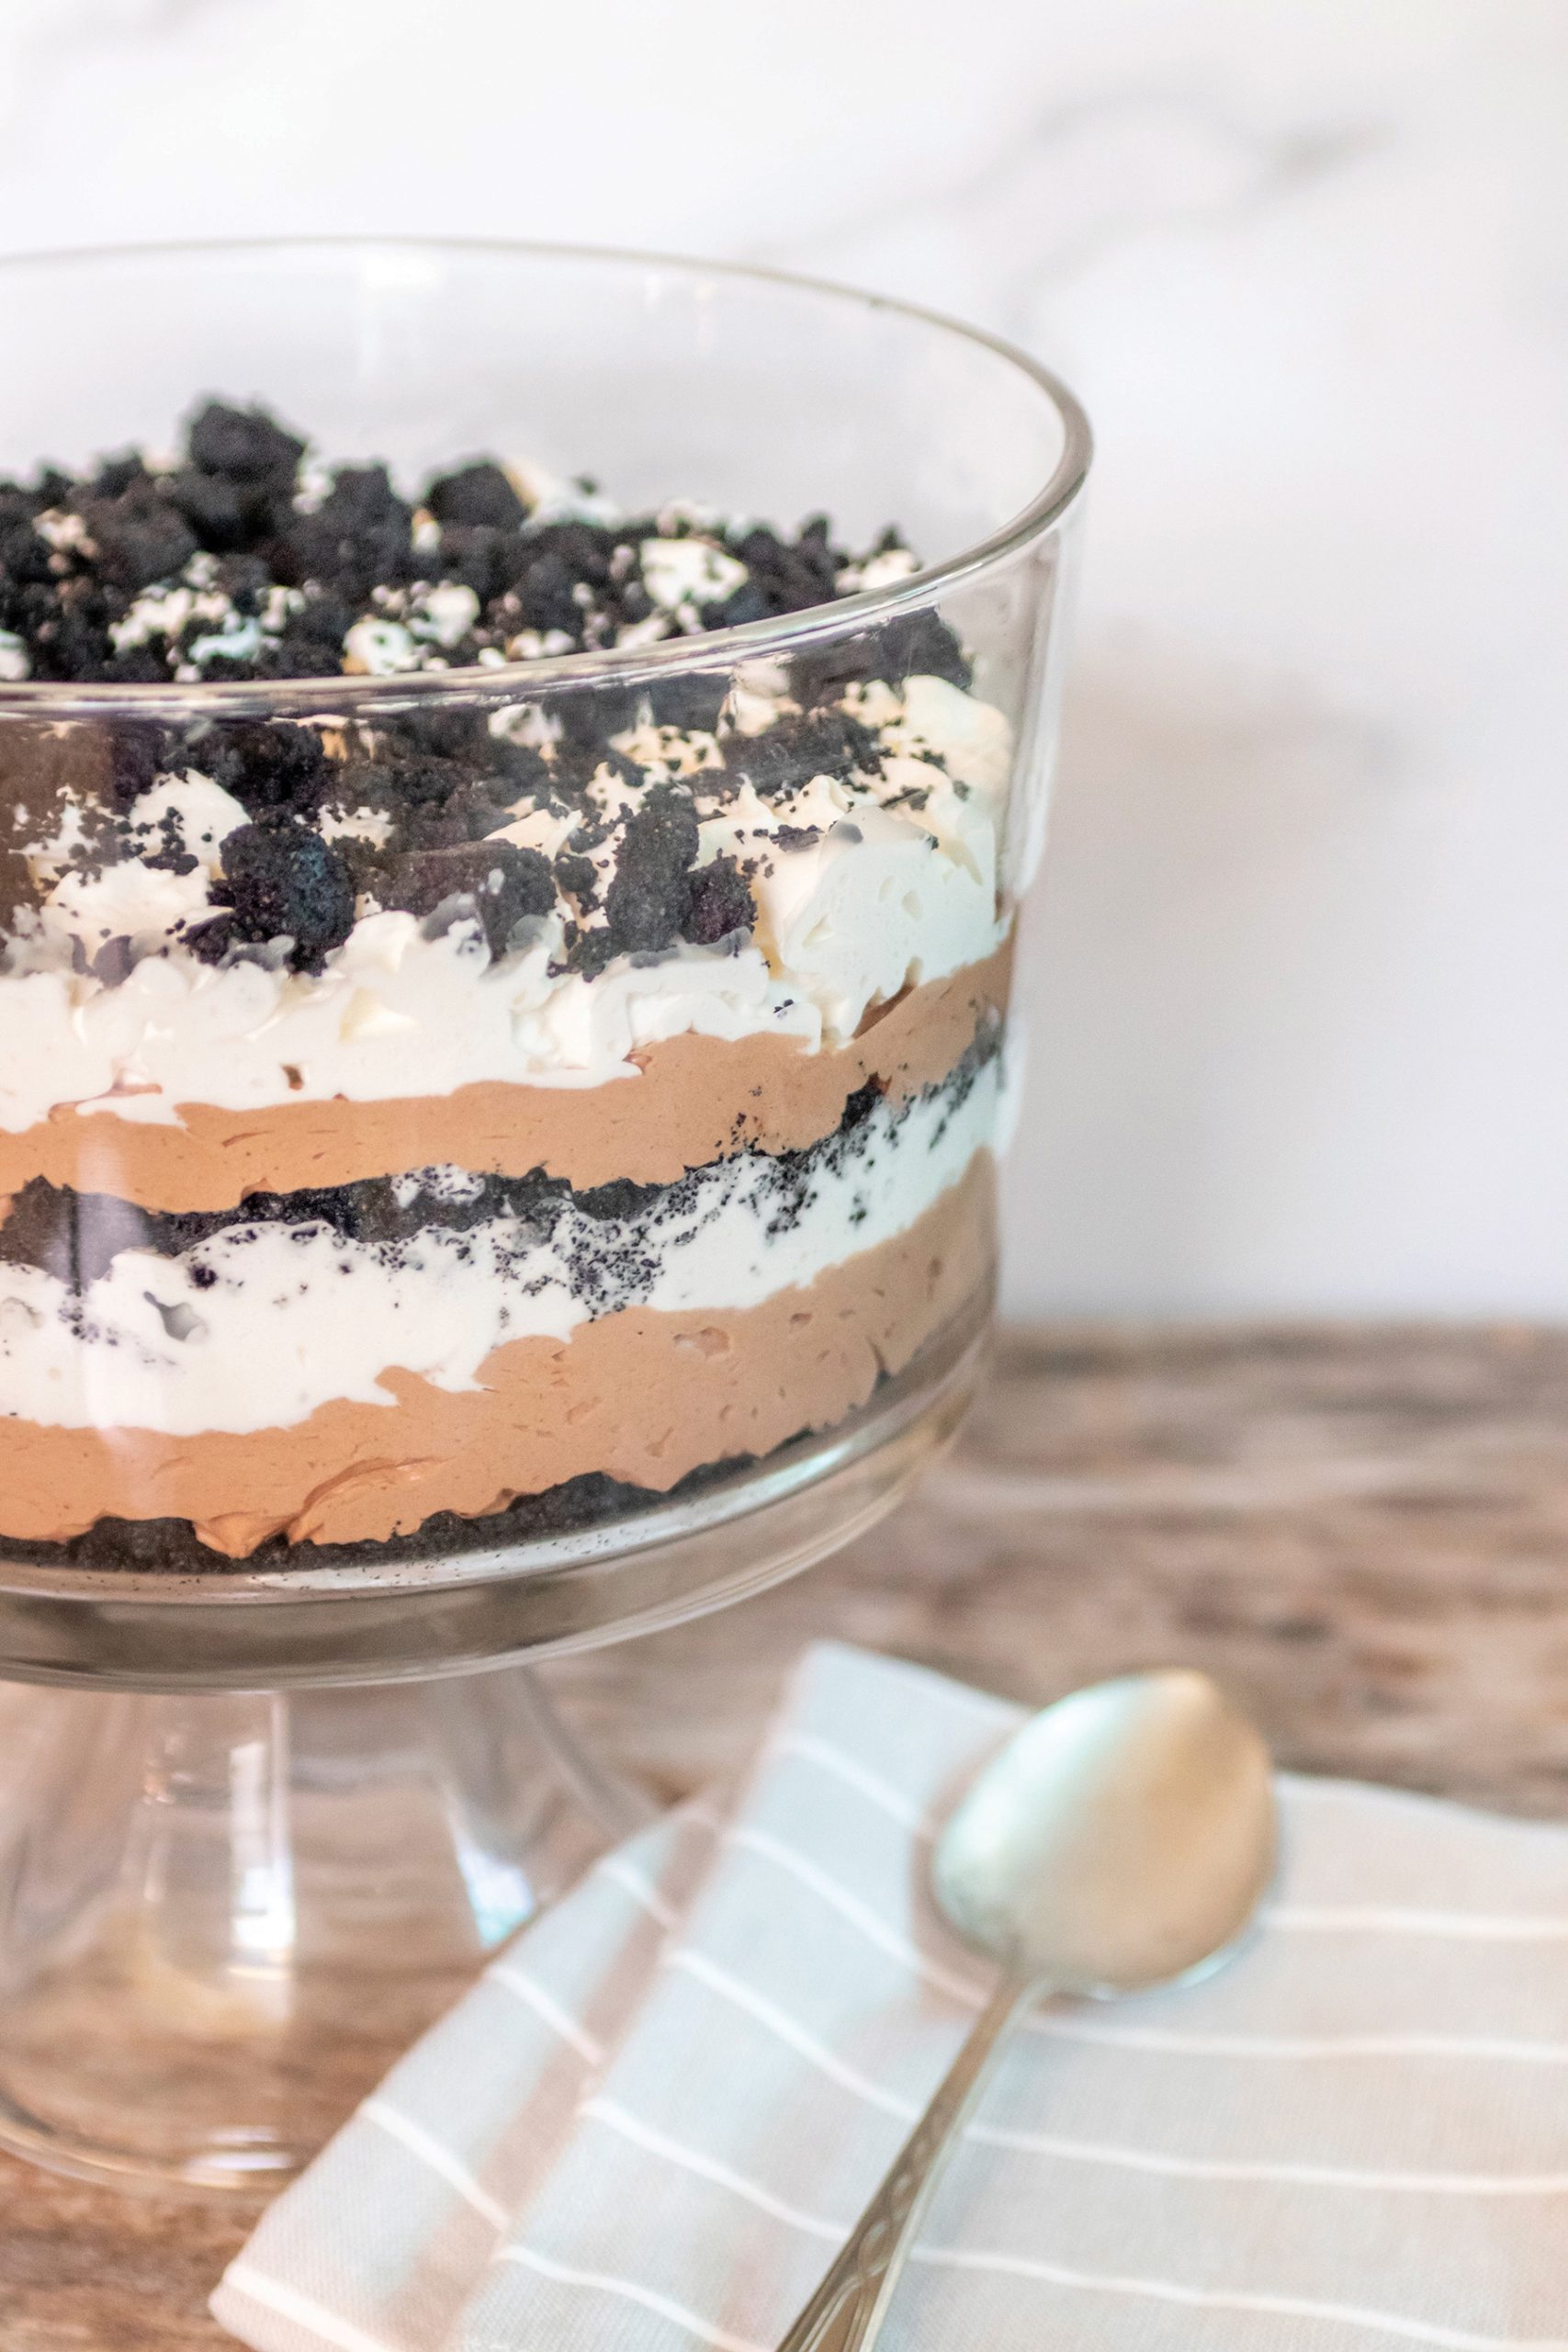 Dirt cake in a clear glass trifle bowl. serving spoon and light gray and white striped napkin.